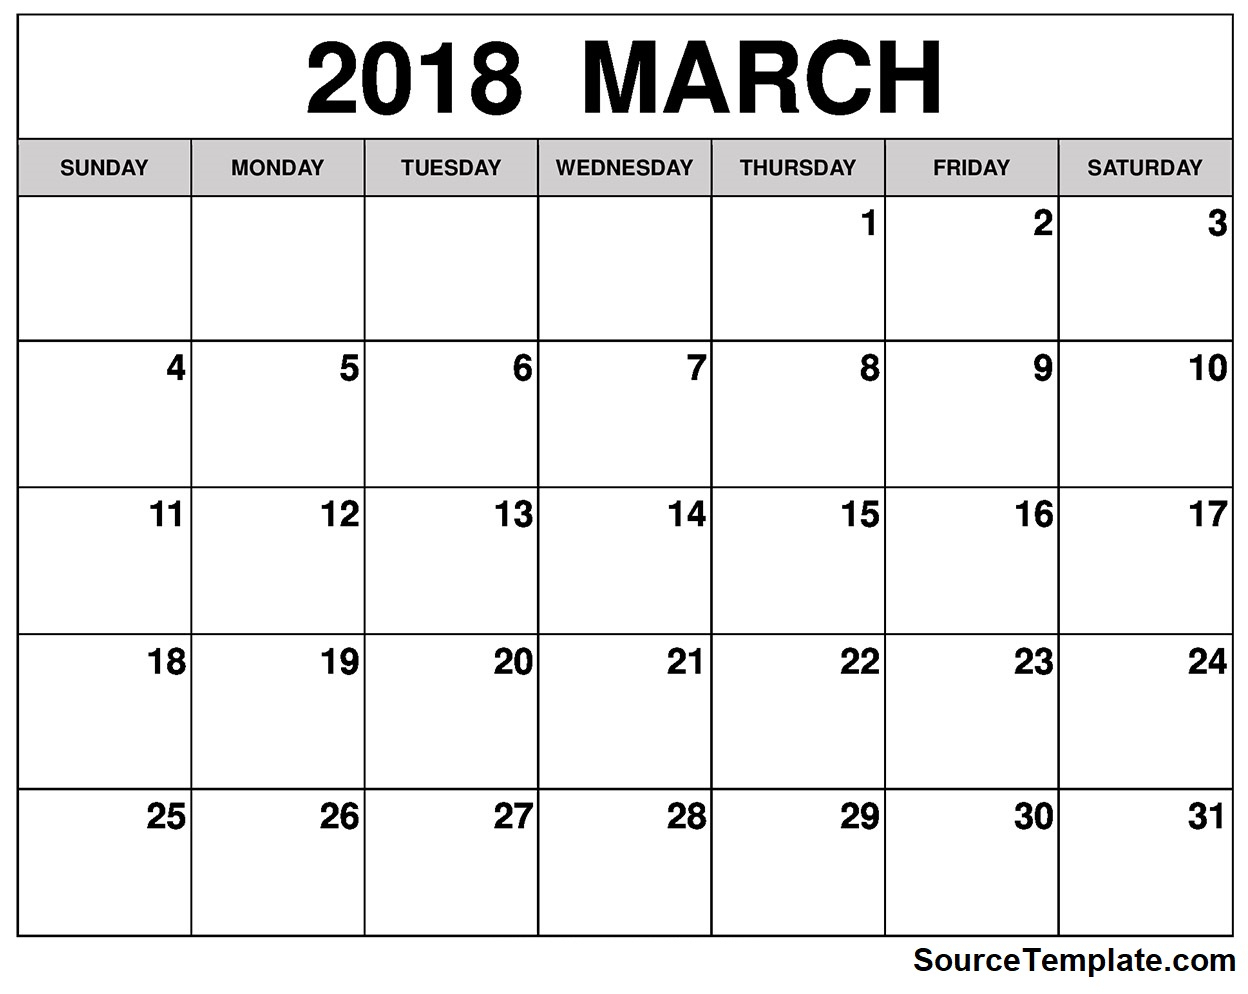 free 5 march 2018 calendar printable template source